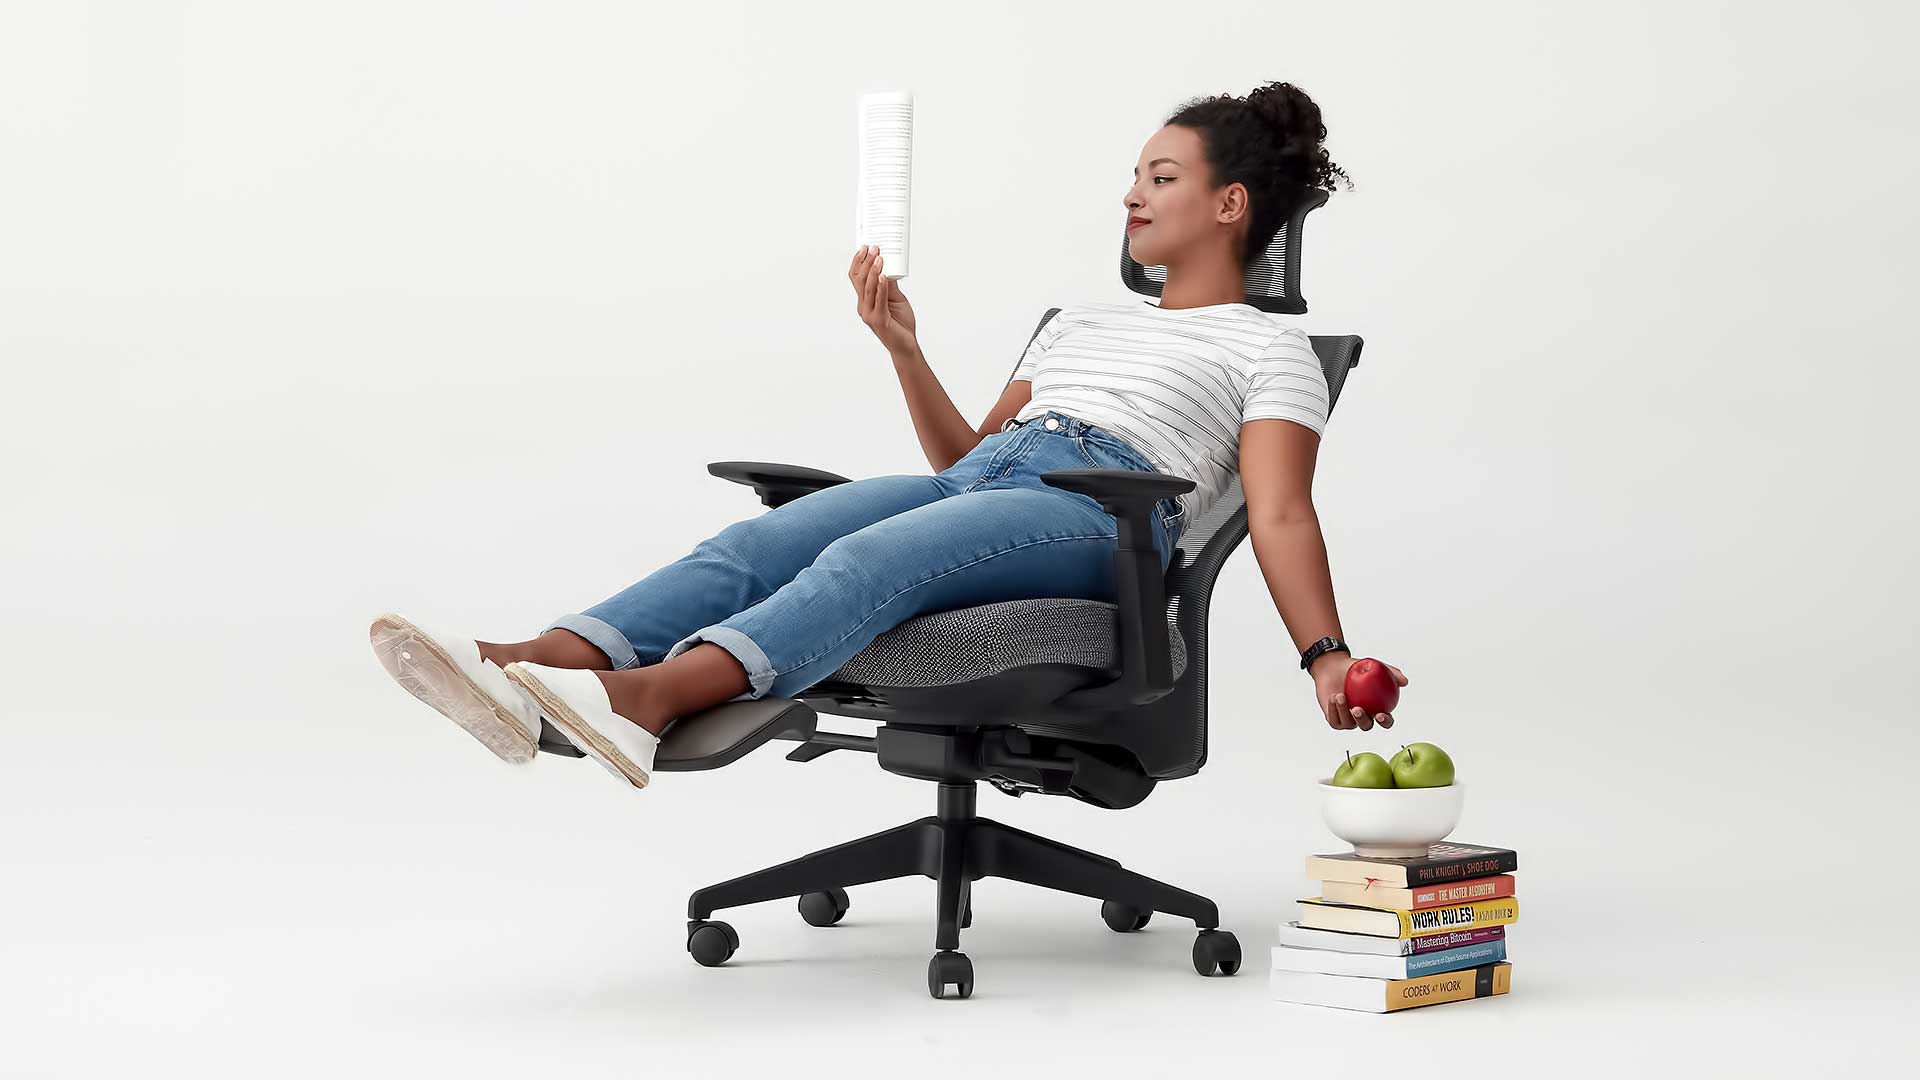 Ergonomic Chair With Leg Rest: 9 Benefits You Should Know